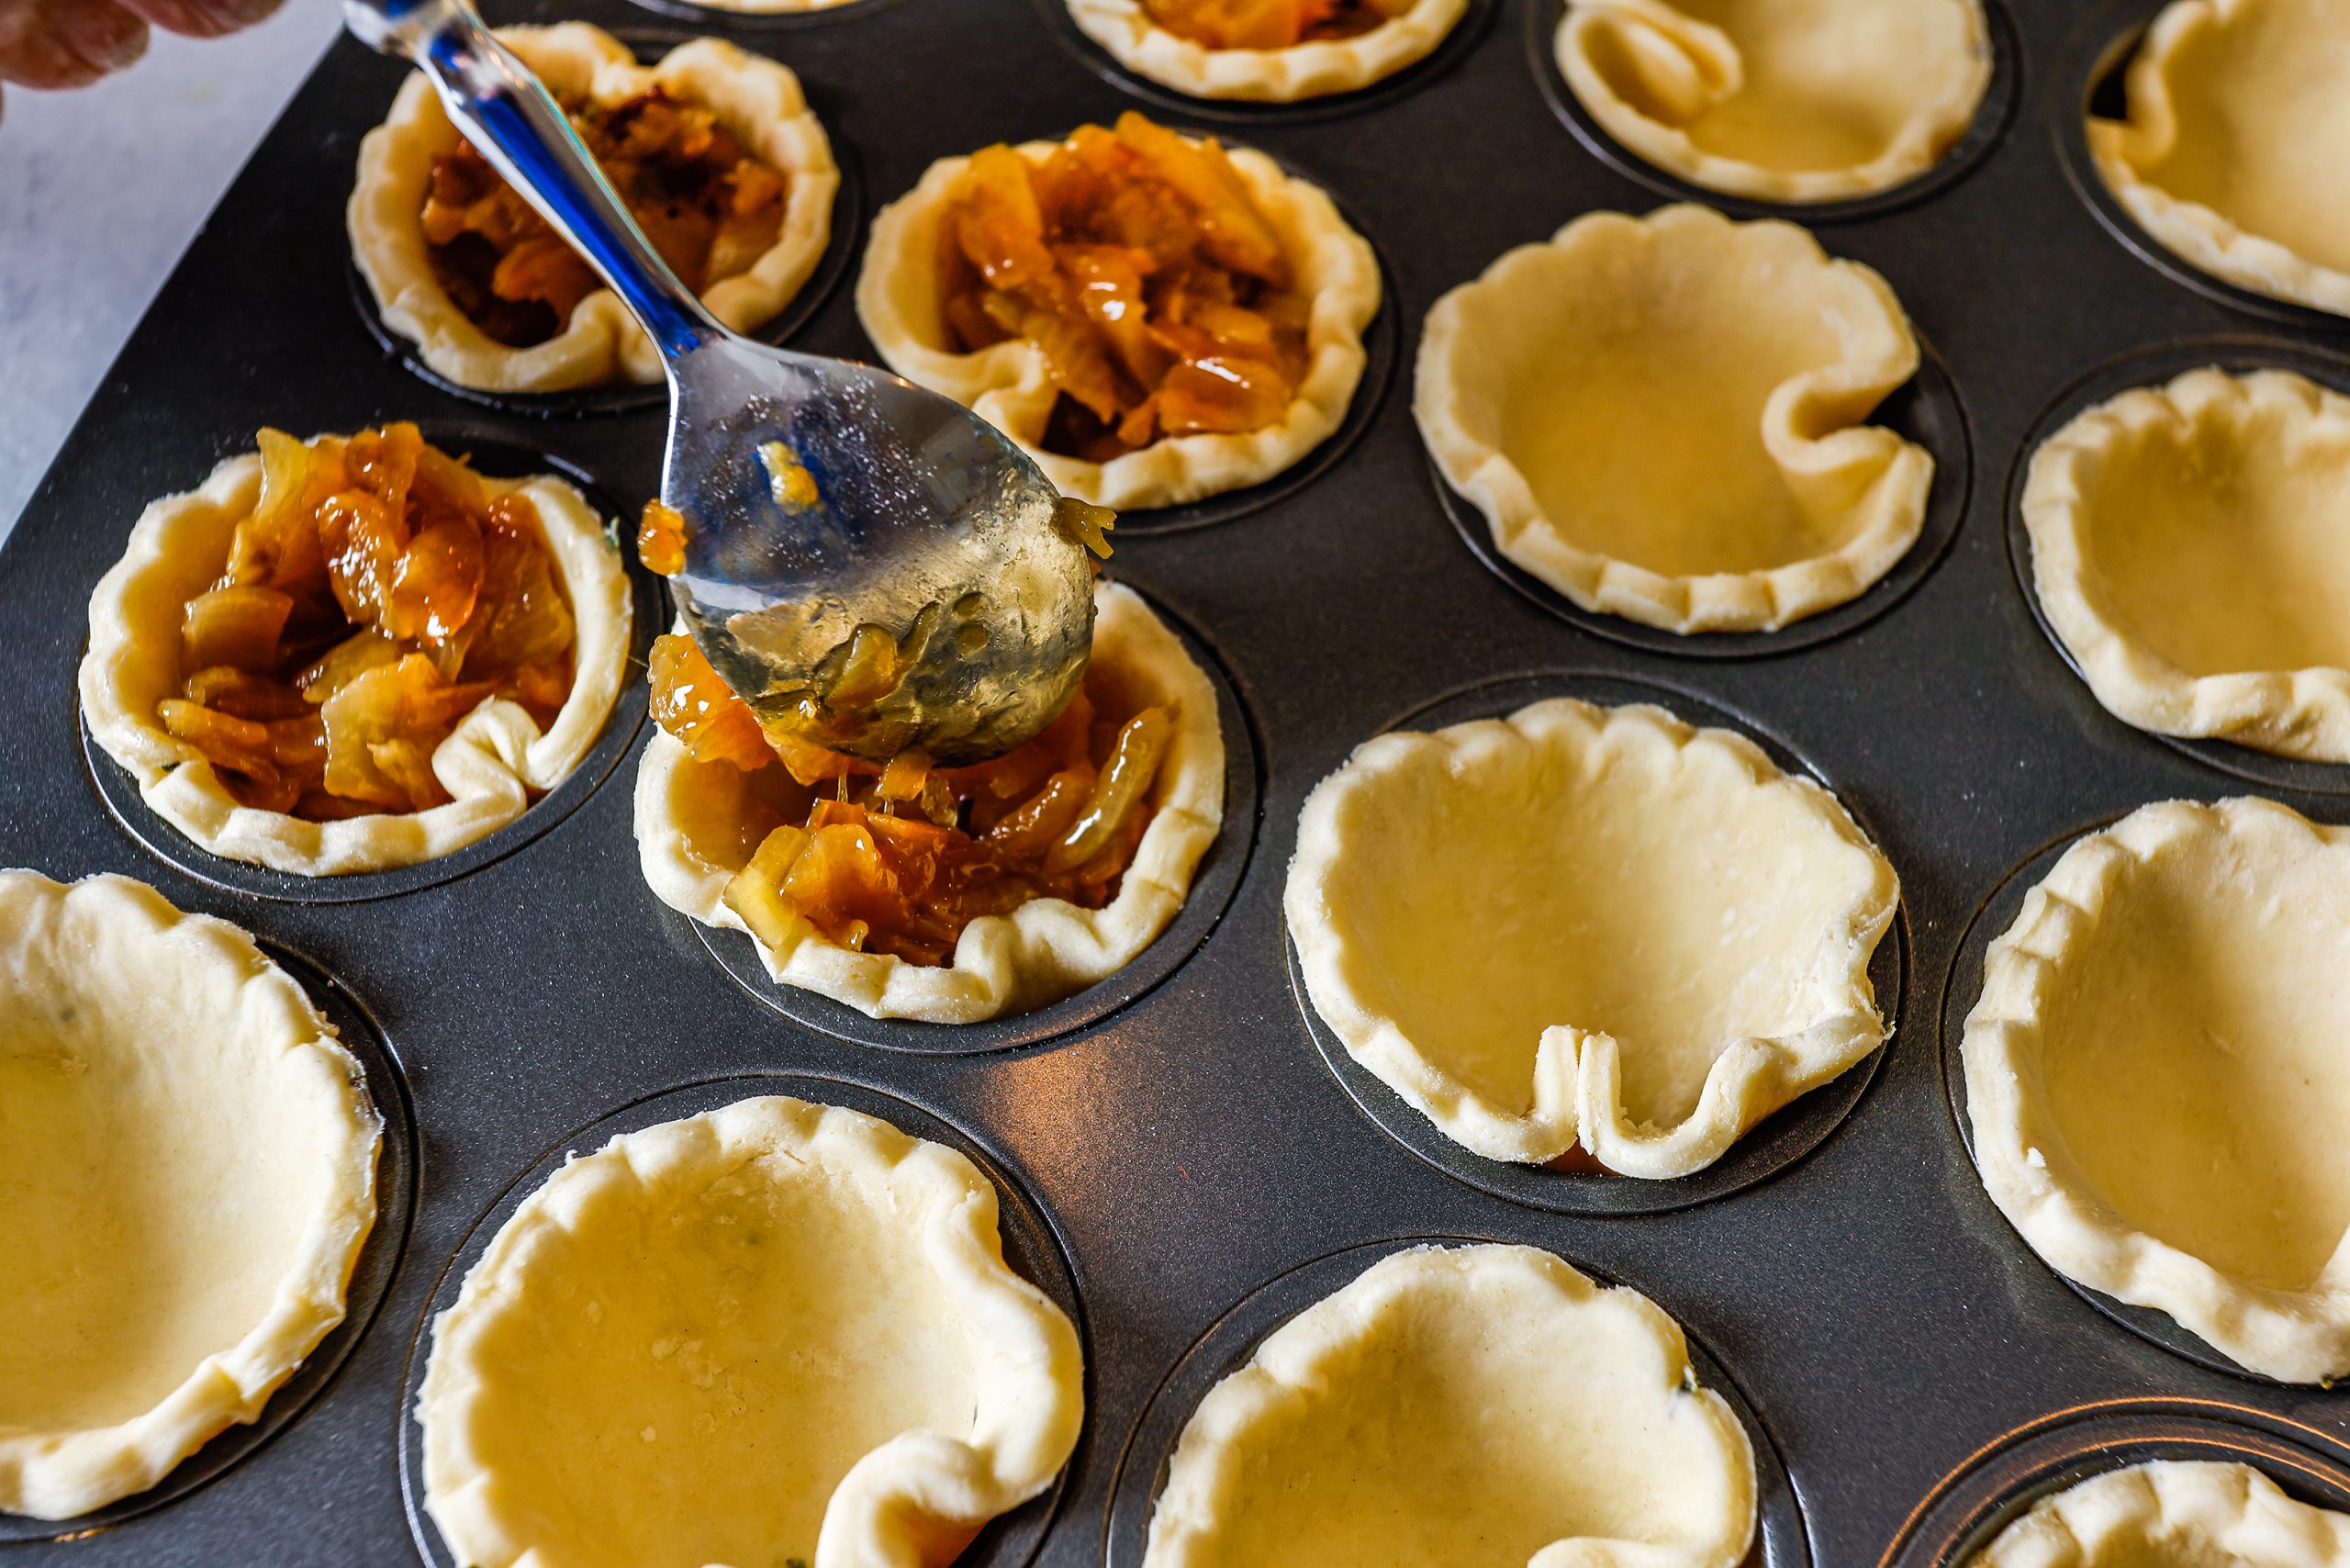 To prepare the Caramelized Onion Tartlets, combine the flour, thyme, and salt in a bowl and toss in the butter cubes to coat with flour. Working quickly, combine the mixture. After the pastry mixture has rested in the refrigerator, roll it out to ⅛-inch thickness. Using a cookie cutter, cut 3-inch circles of dough and tamp the rounds into mini muffin pans. Drop 2 to 3 teaspoons of the caramelized onion into each tart shell. Bake at 425 F for 18 to 20 minutes.